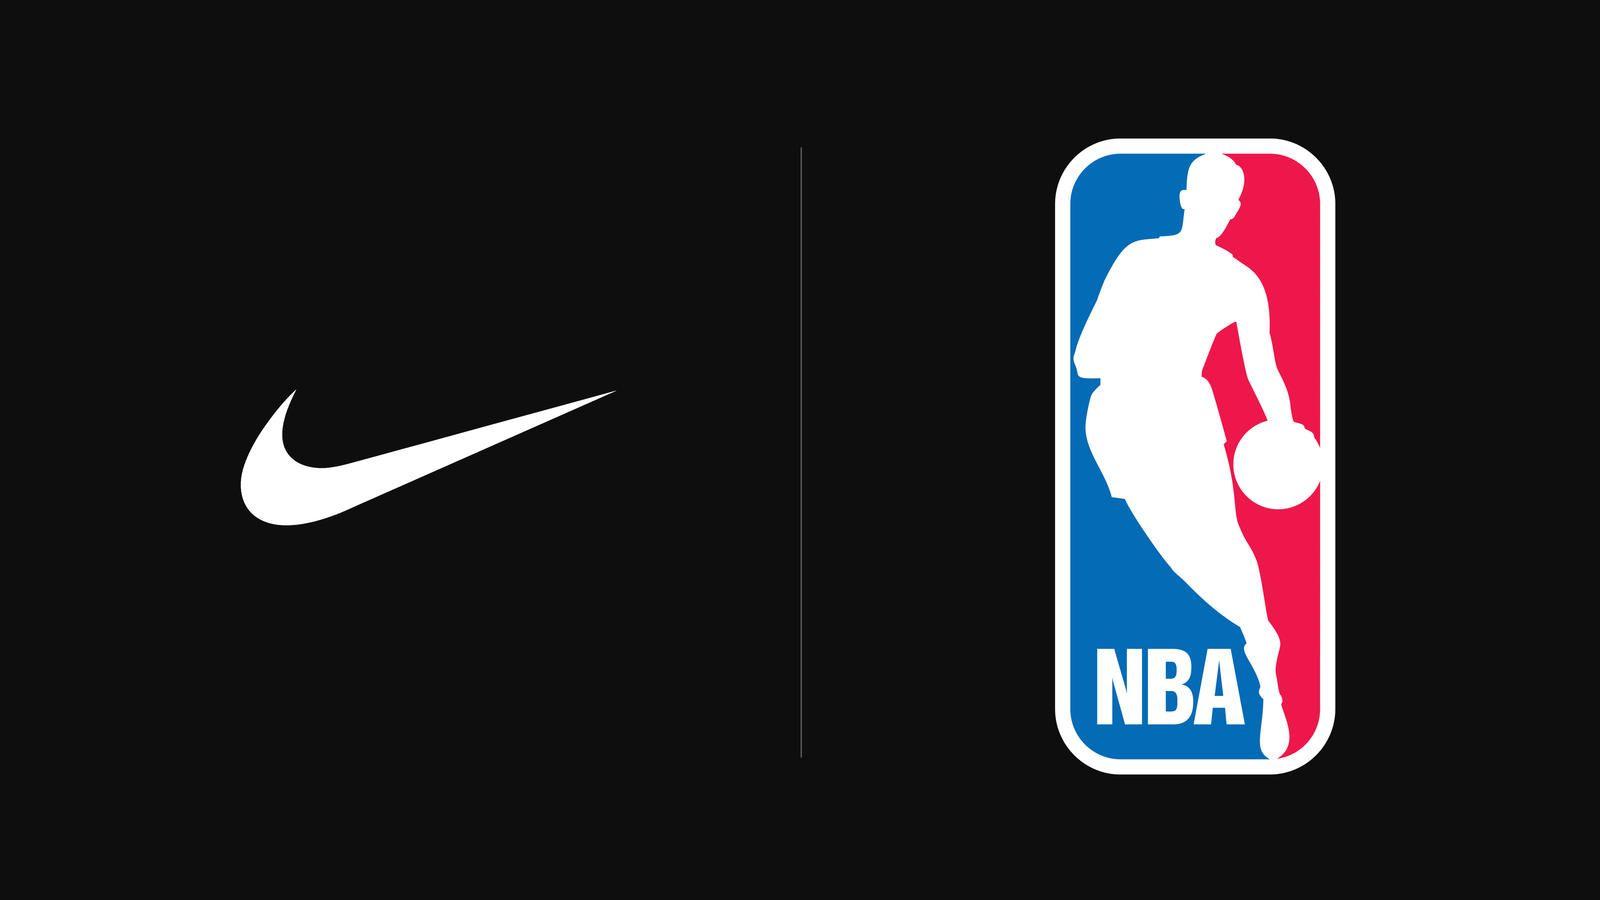 Official NBA Logo - NIKE, Inc. to Become Exclusive Oncourt Uniform and Apparel Provider ...